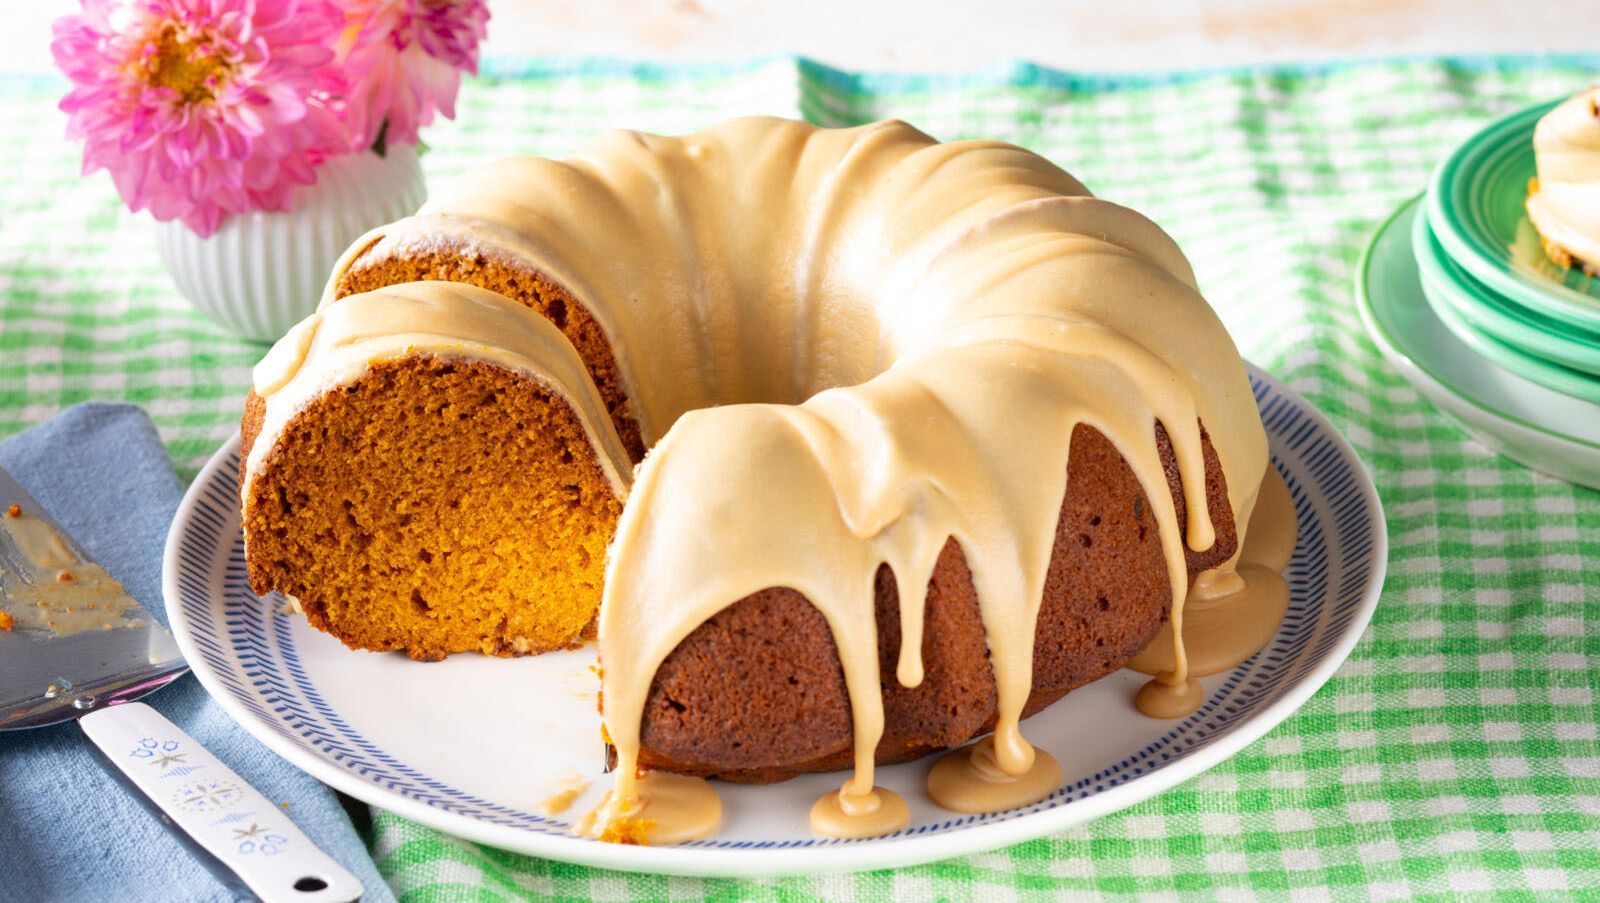 Pumpkin Bundt Cake with Cream Cheese Frosting Recipe - Home. Made. Interest.